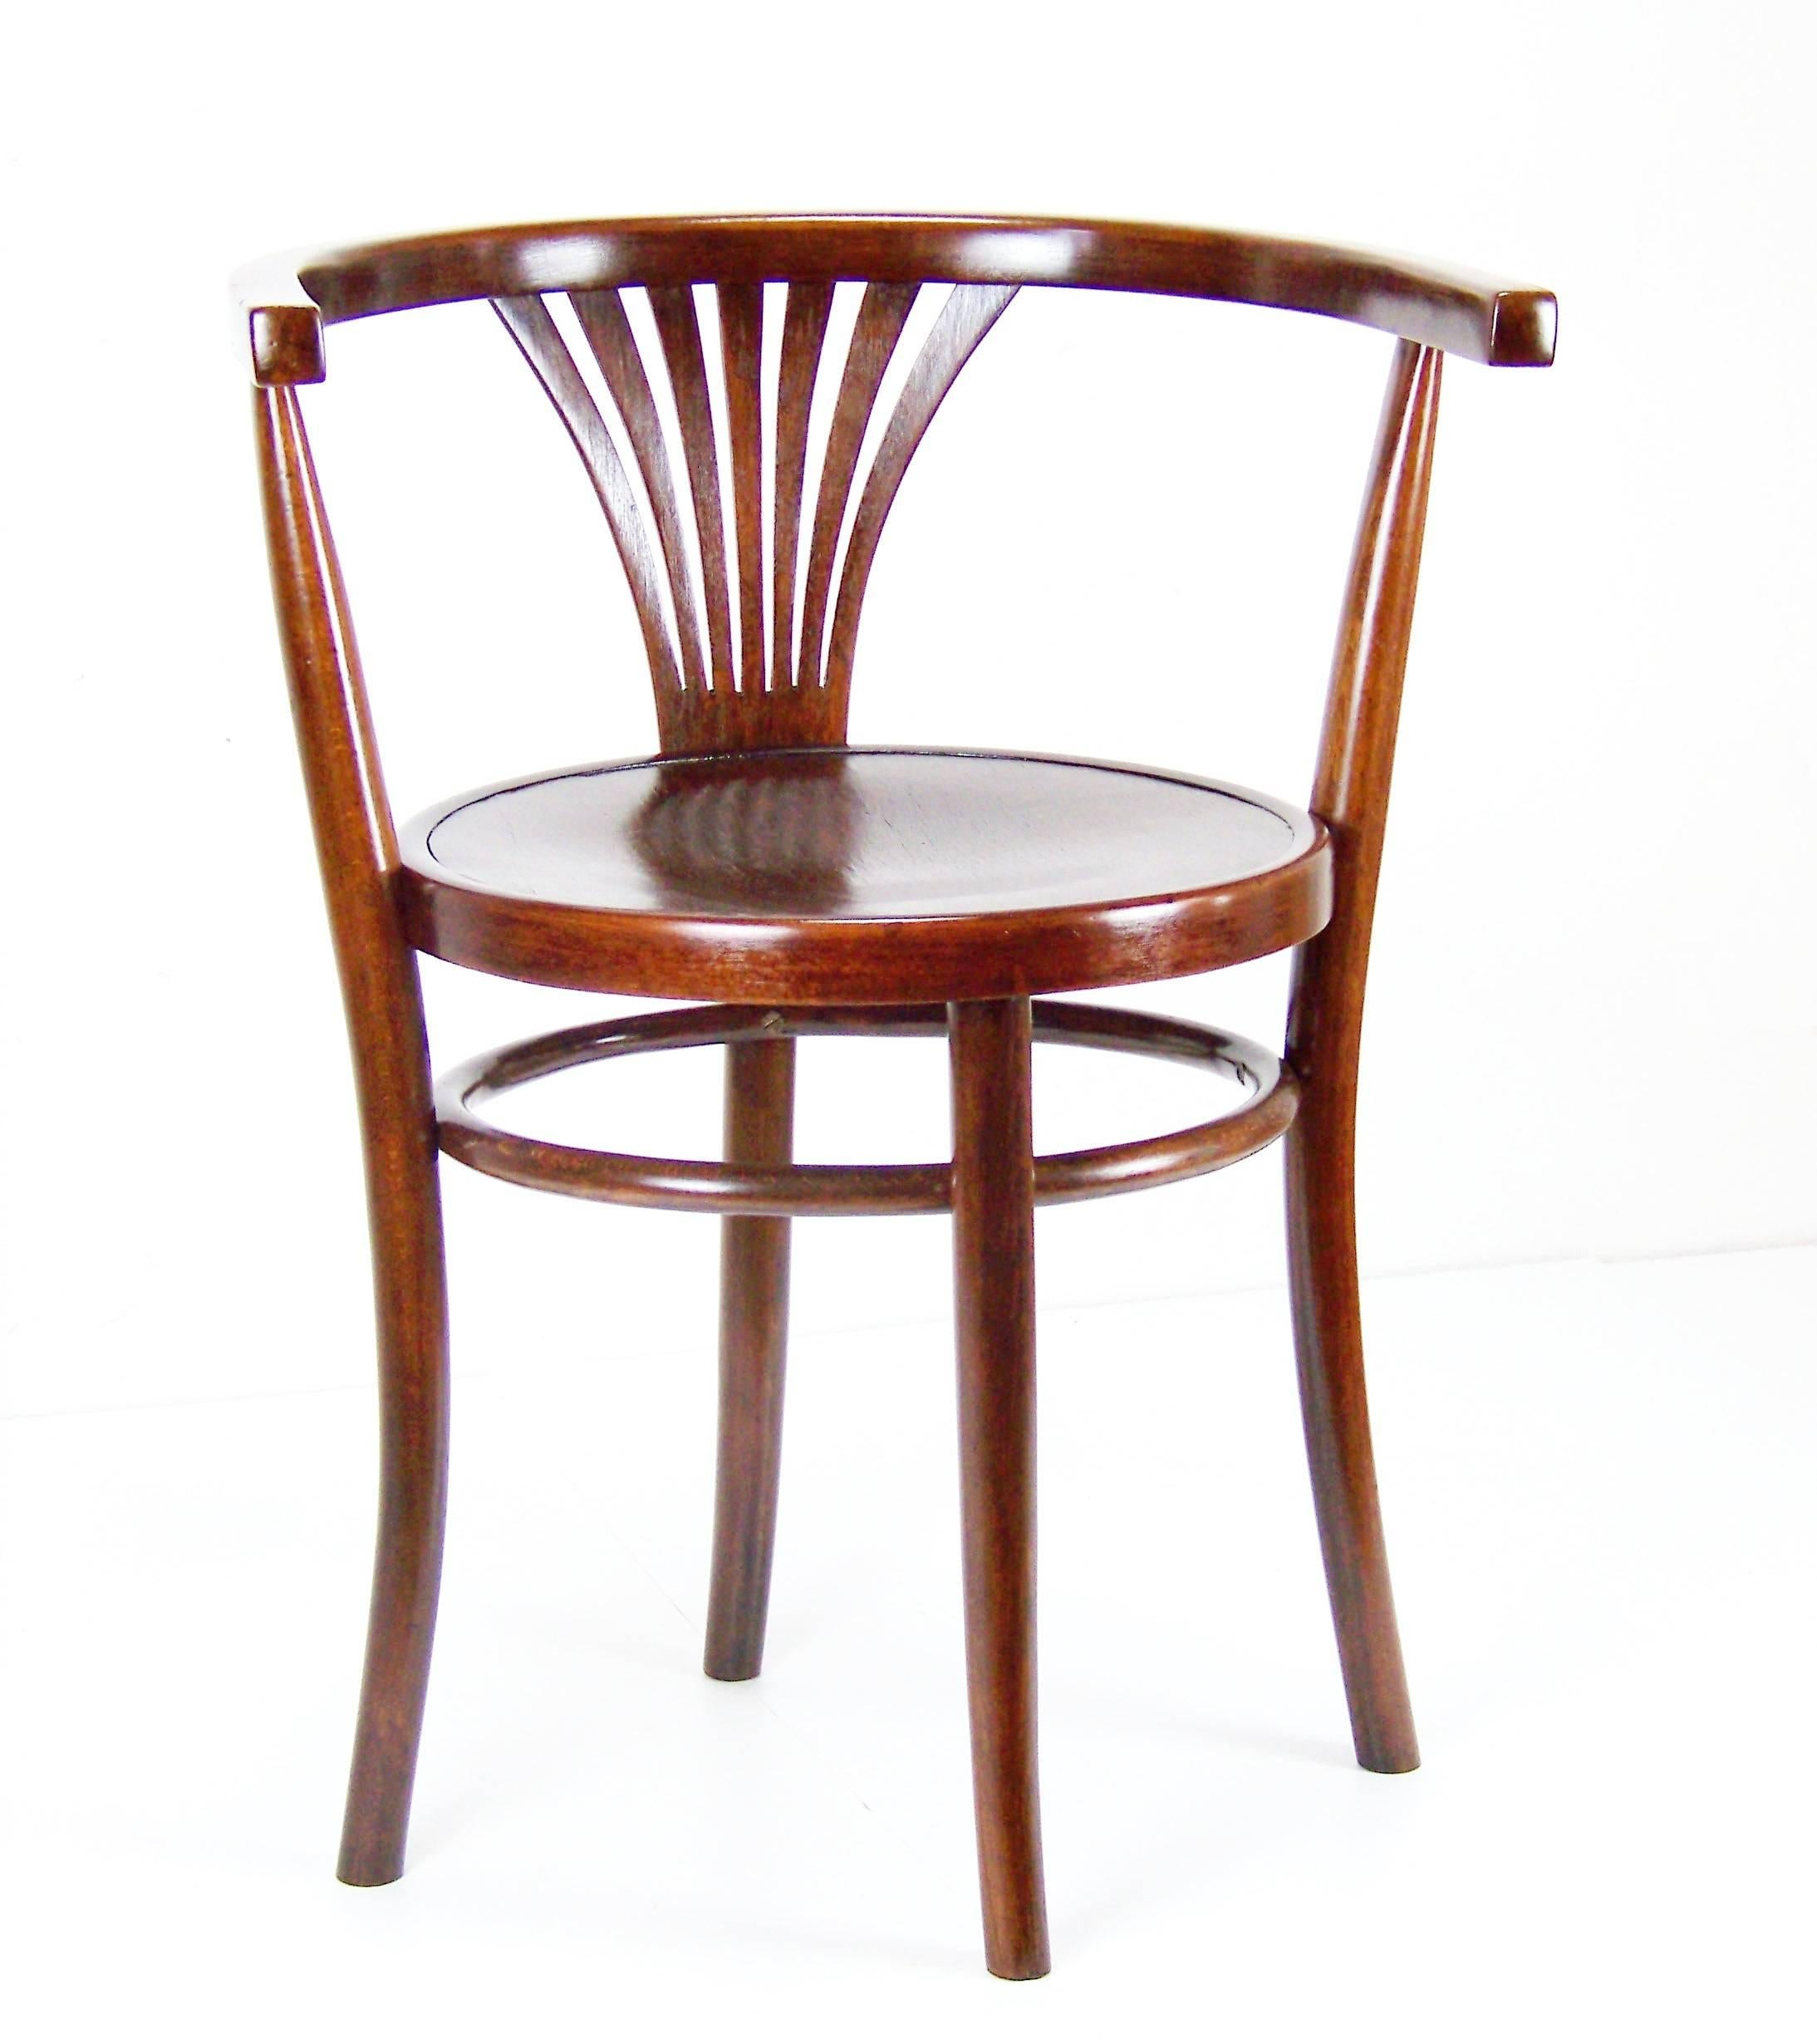 Manufactured by the Tatra company , circa 1920 (Thonet competitor). Bent beechwood. Original condition with minor signs of use. Armchair was cleaned and gentle re-polished with shellac finish - medium walnut shade. Measures: Seat diameter 42cm.